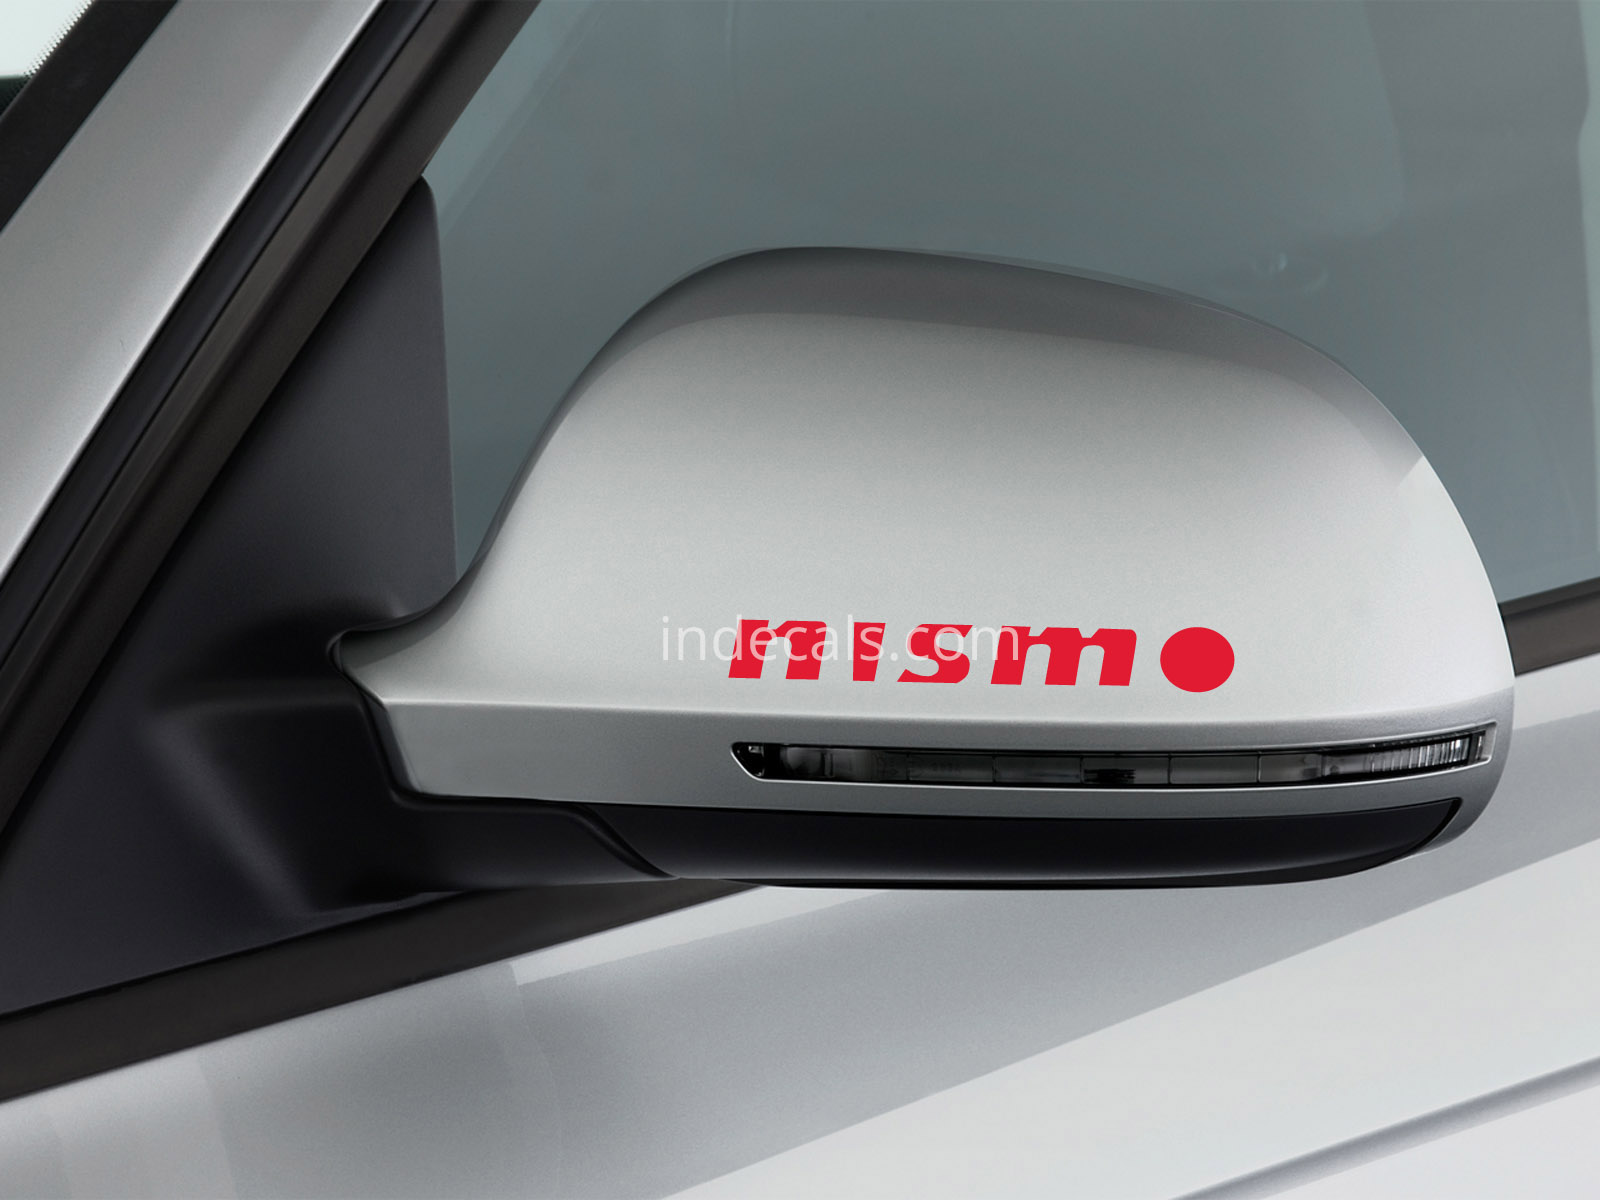 3 x Nismo Stickers for Mirrors - Red